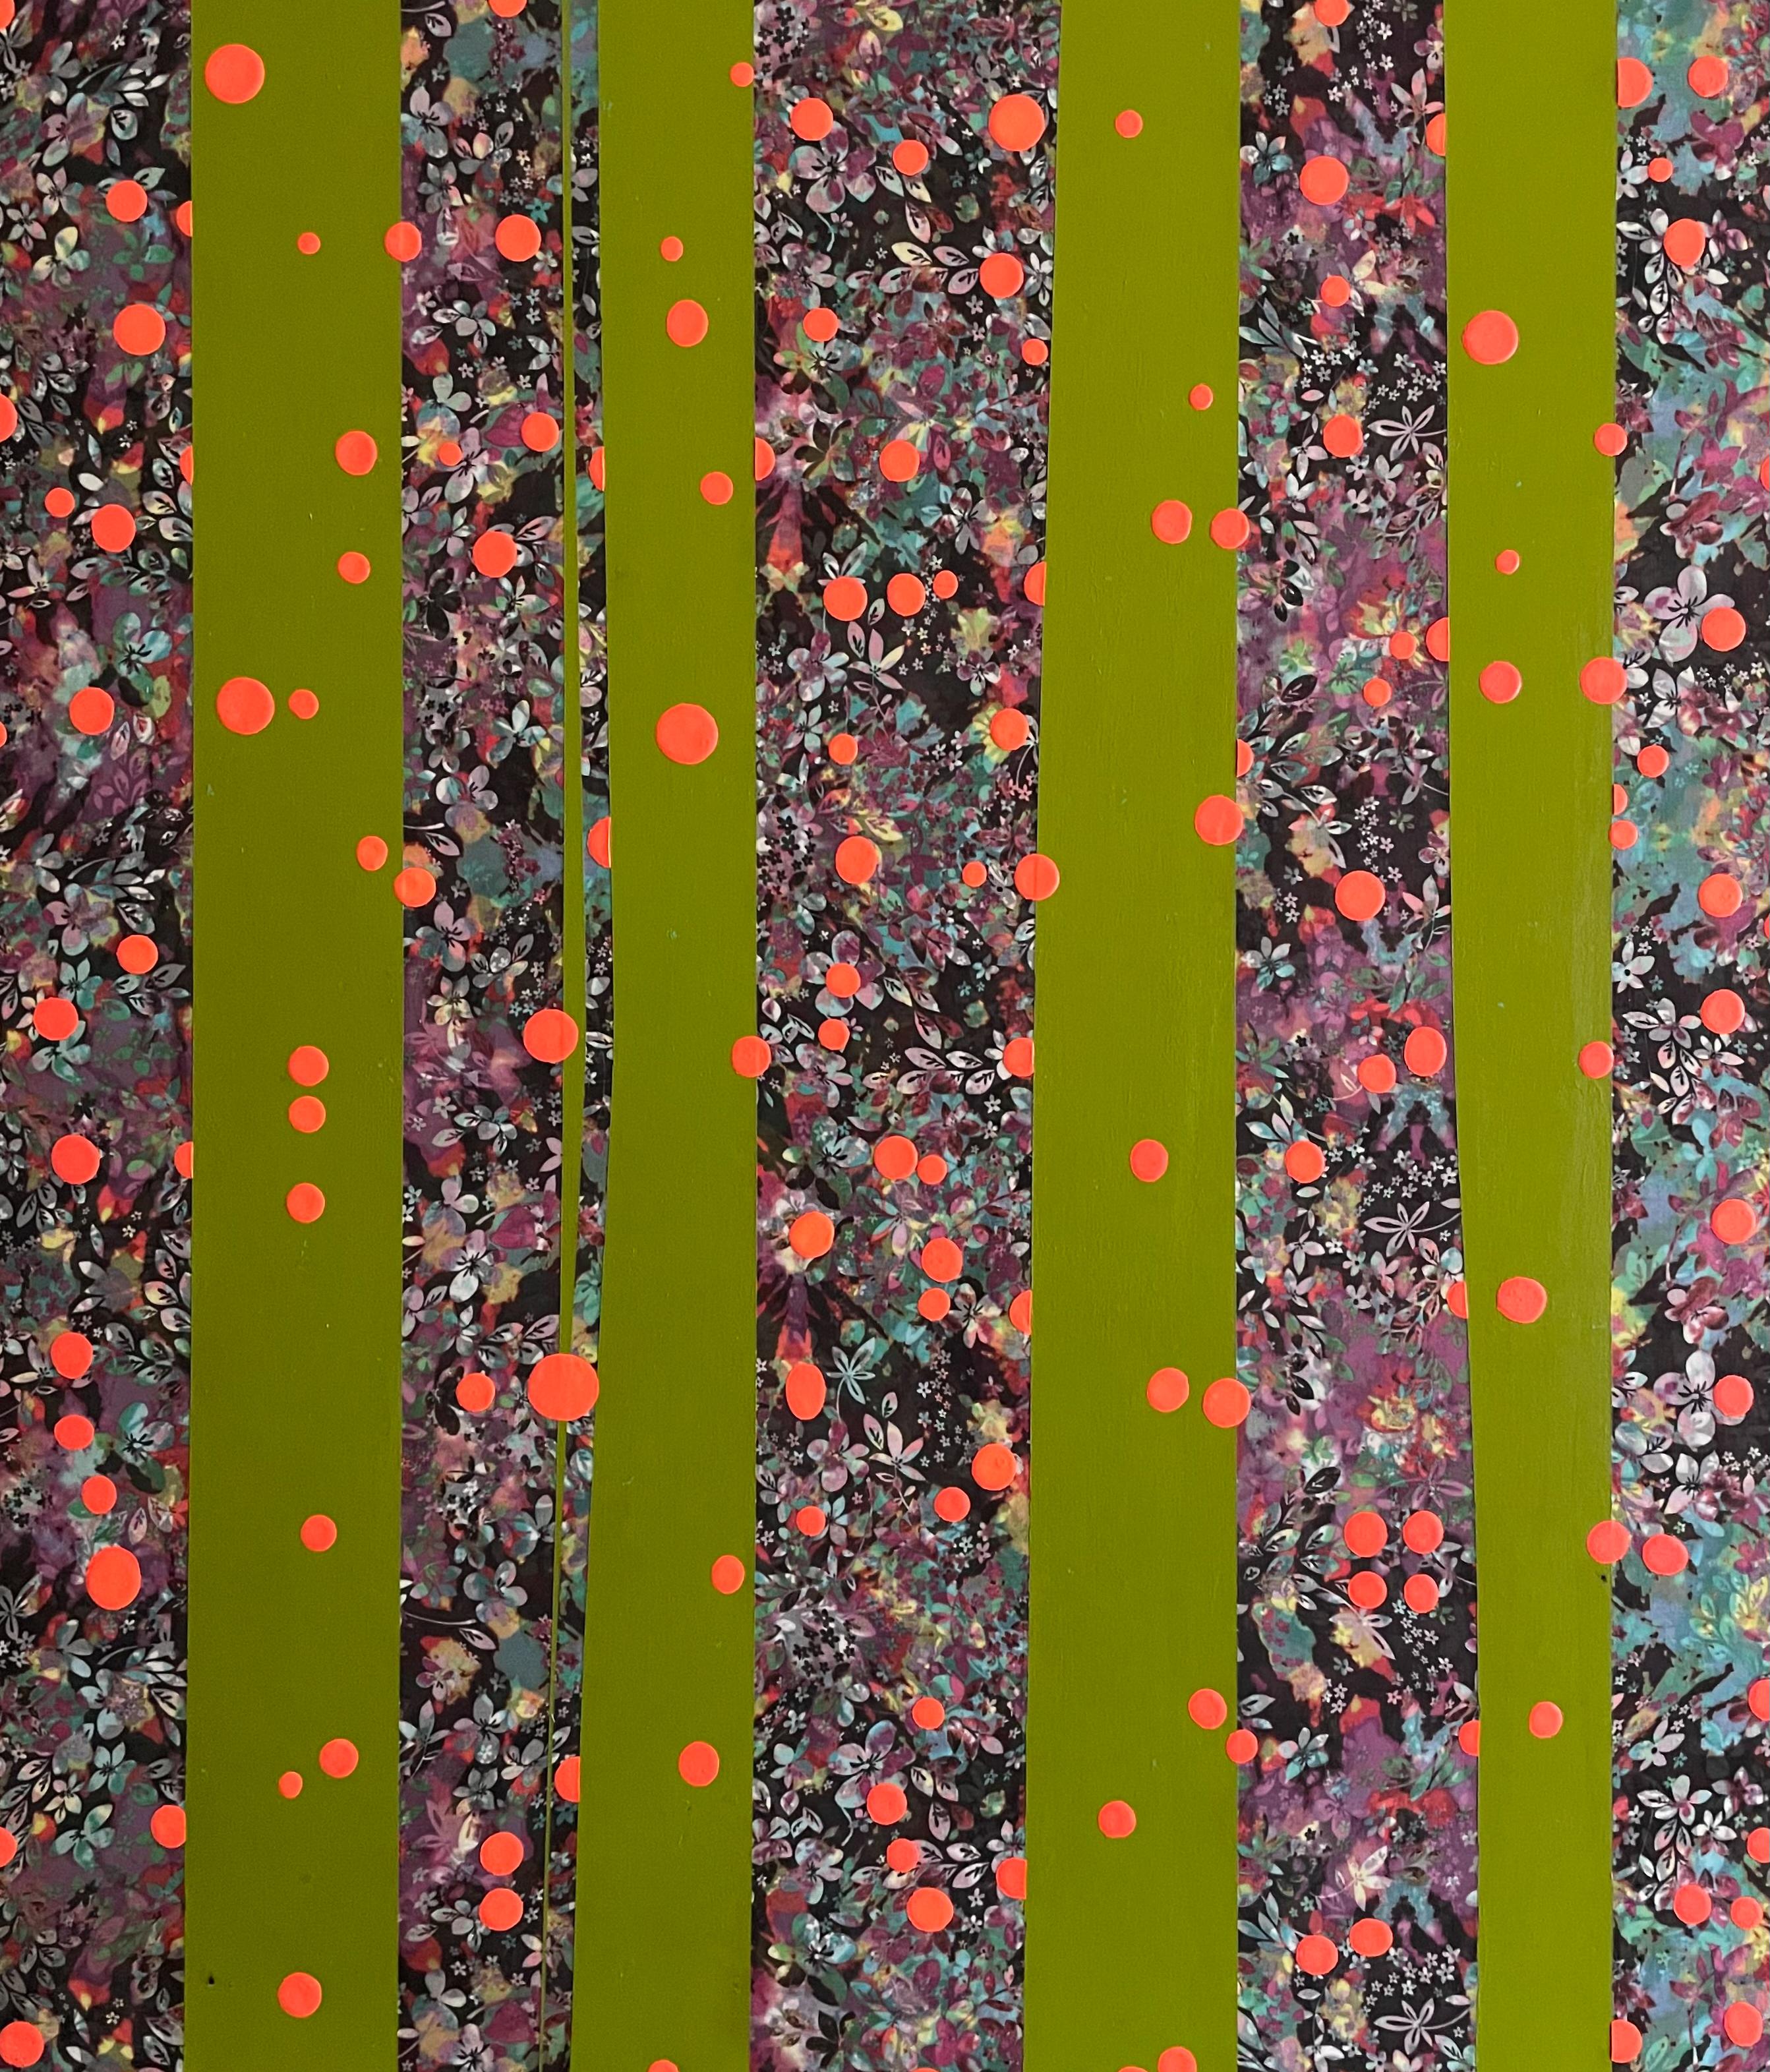 Abstract Painting Michael Corra - Bamboo Floral